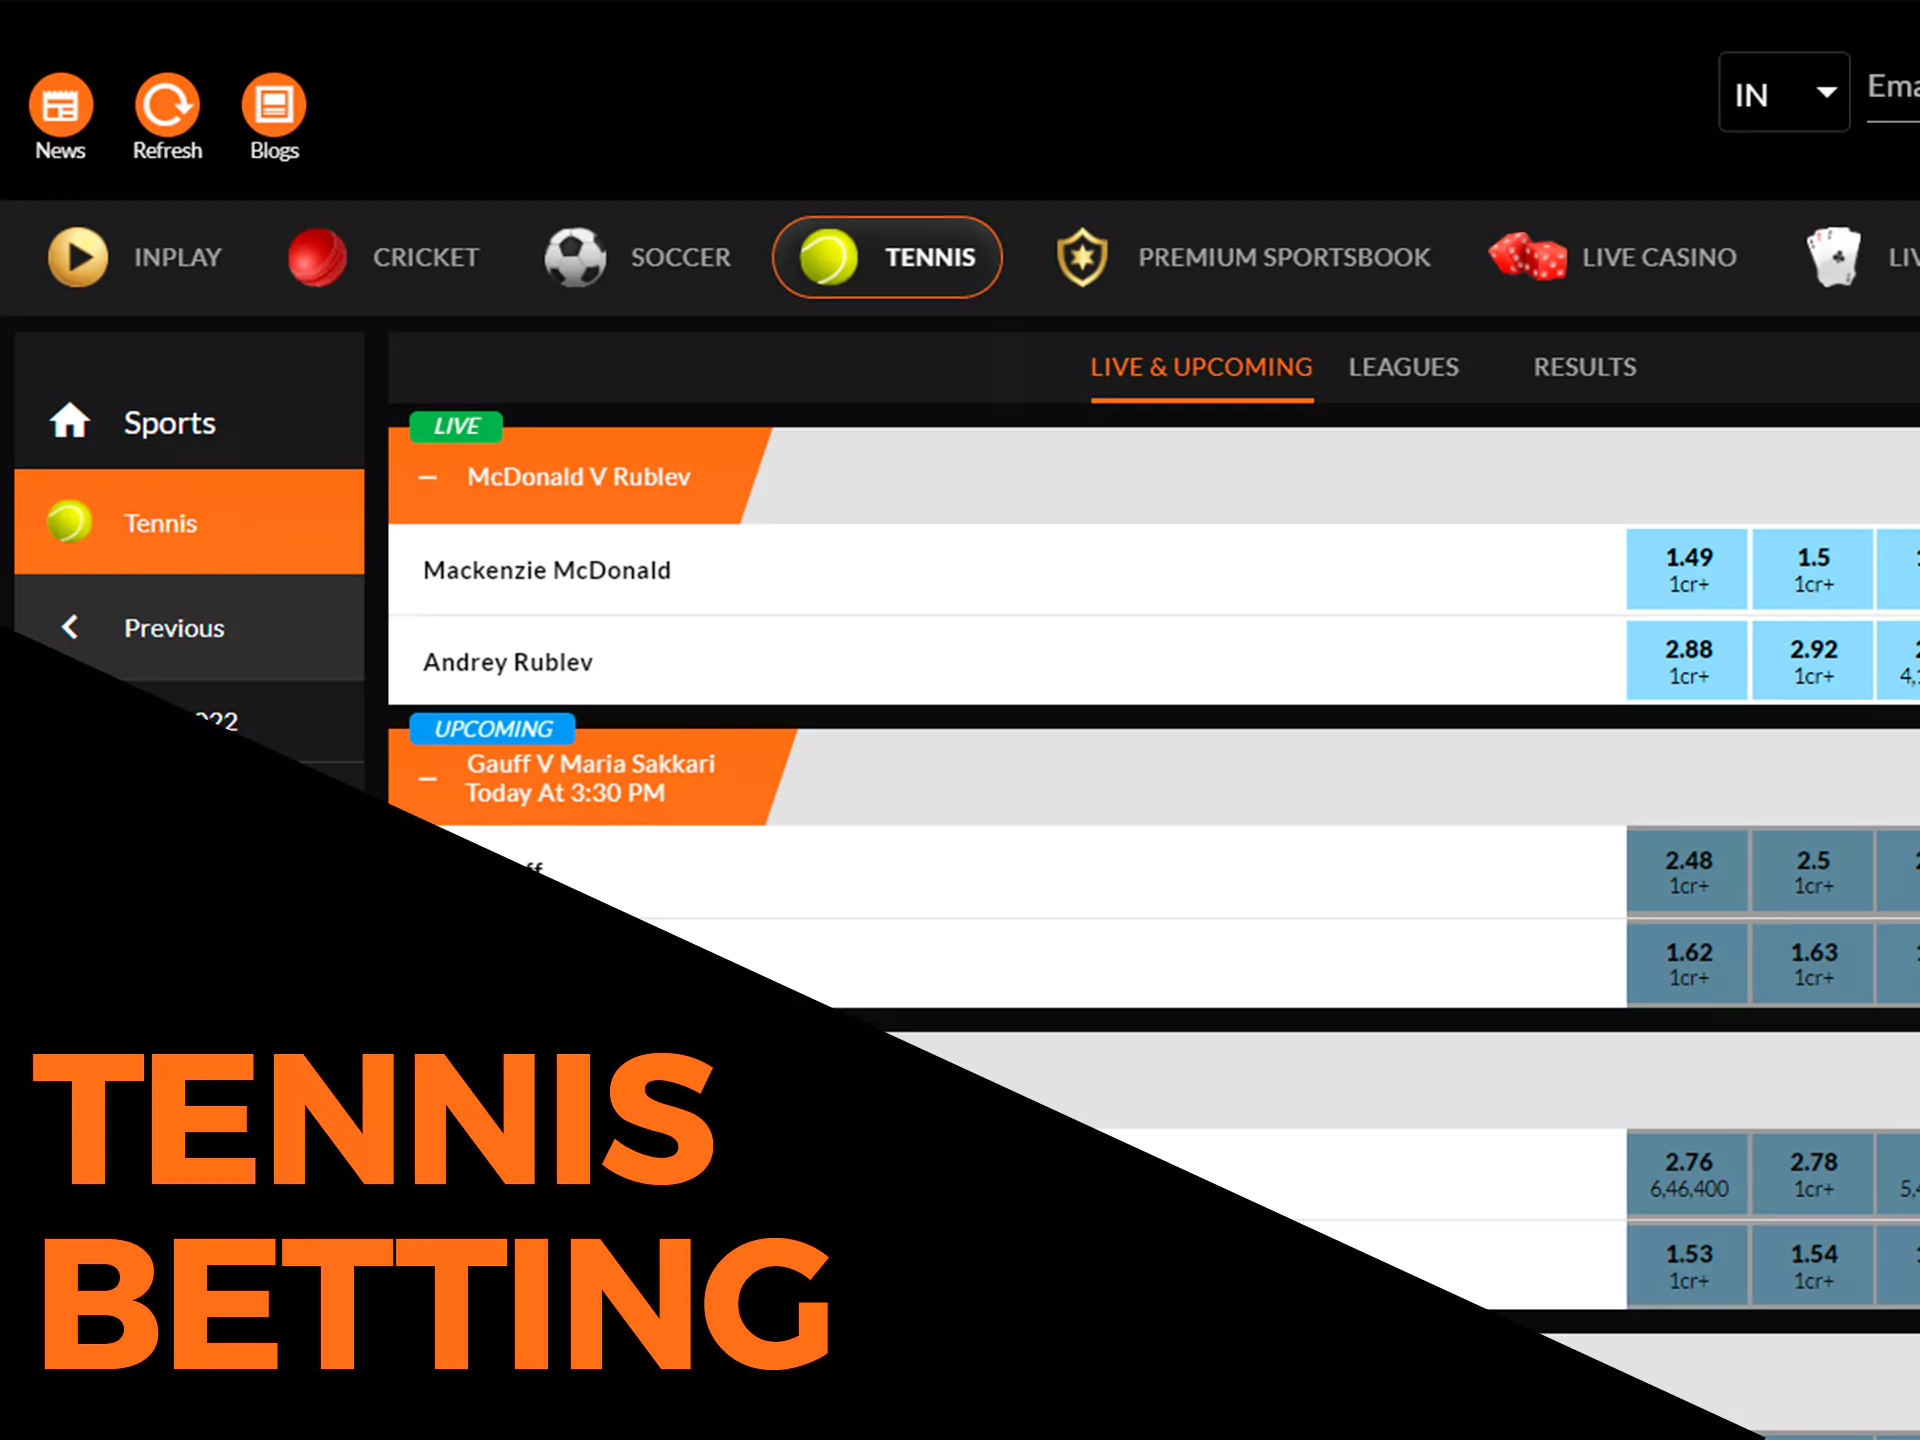 Fairplay offers a lot of markets on tennis betting.